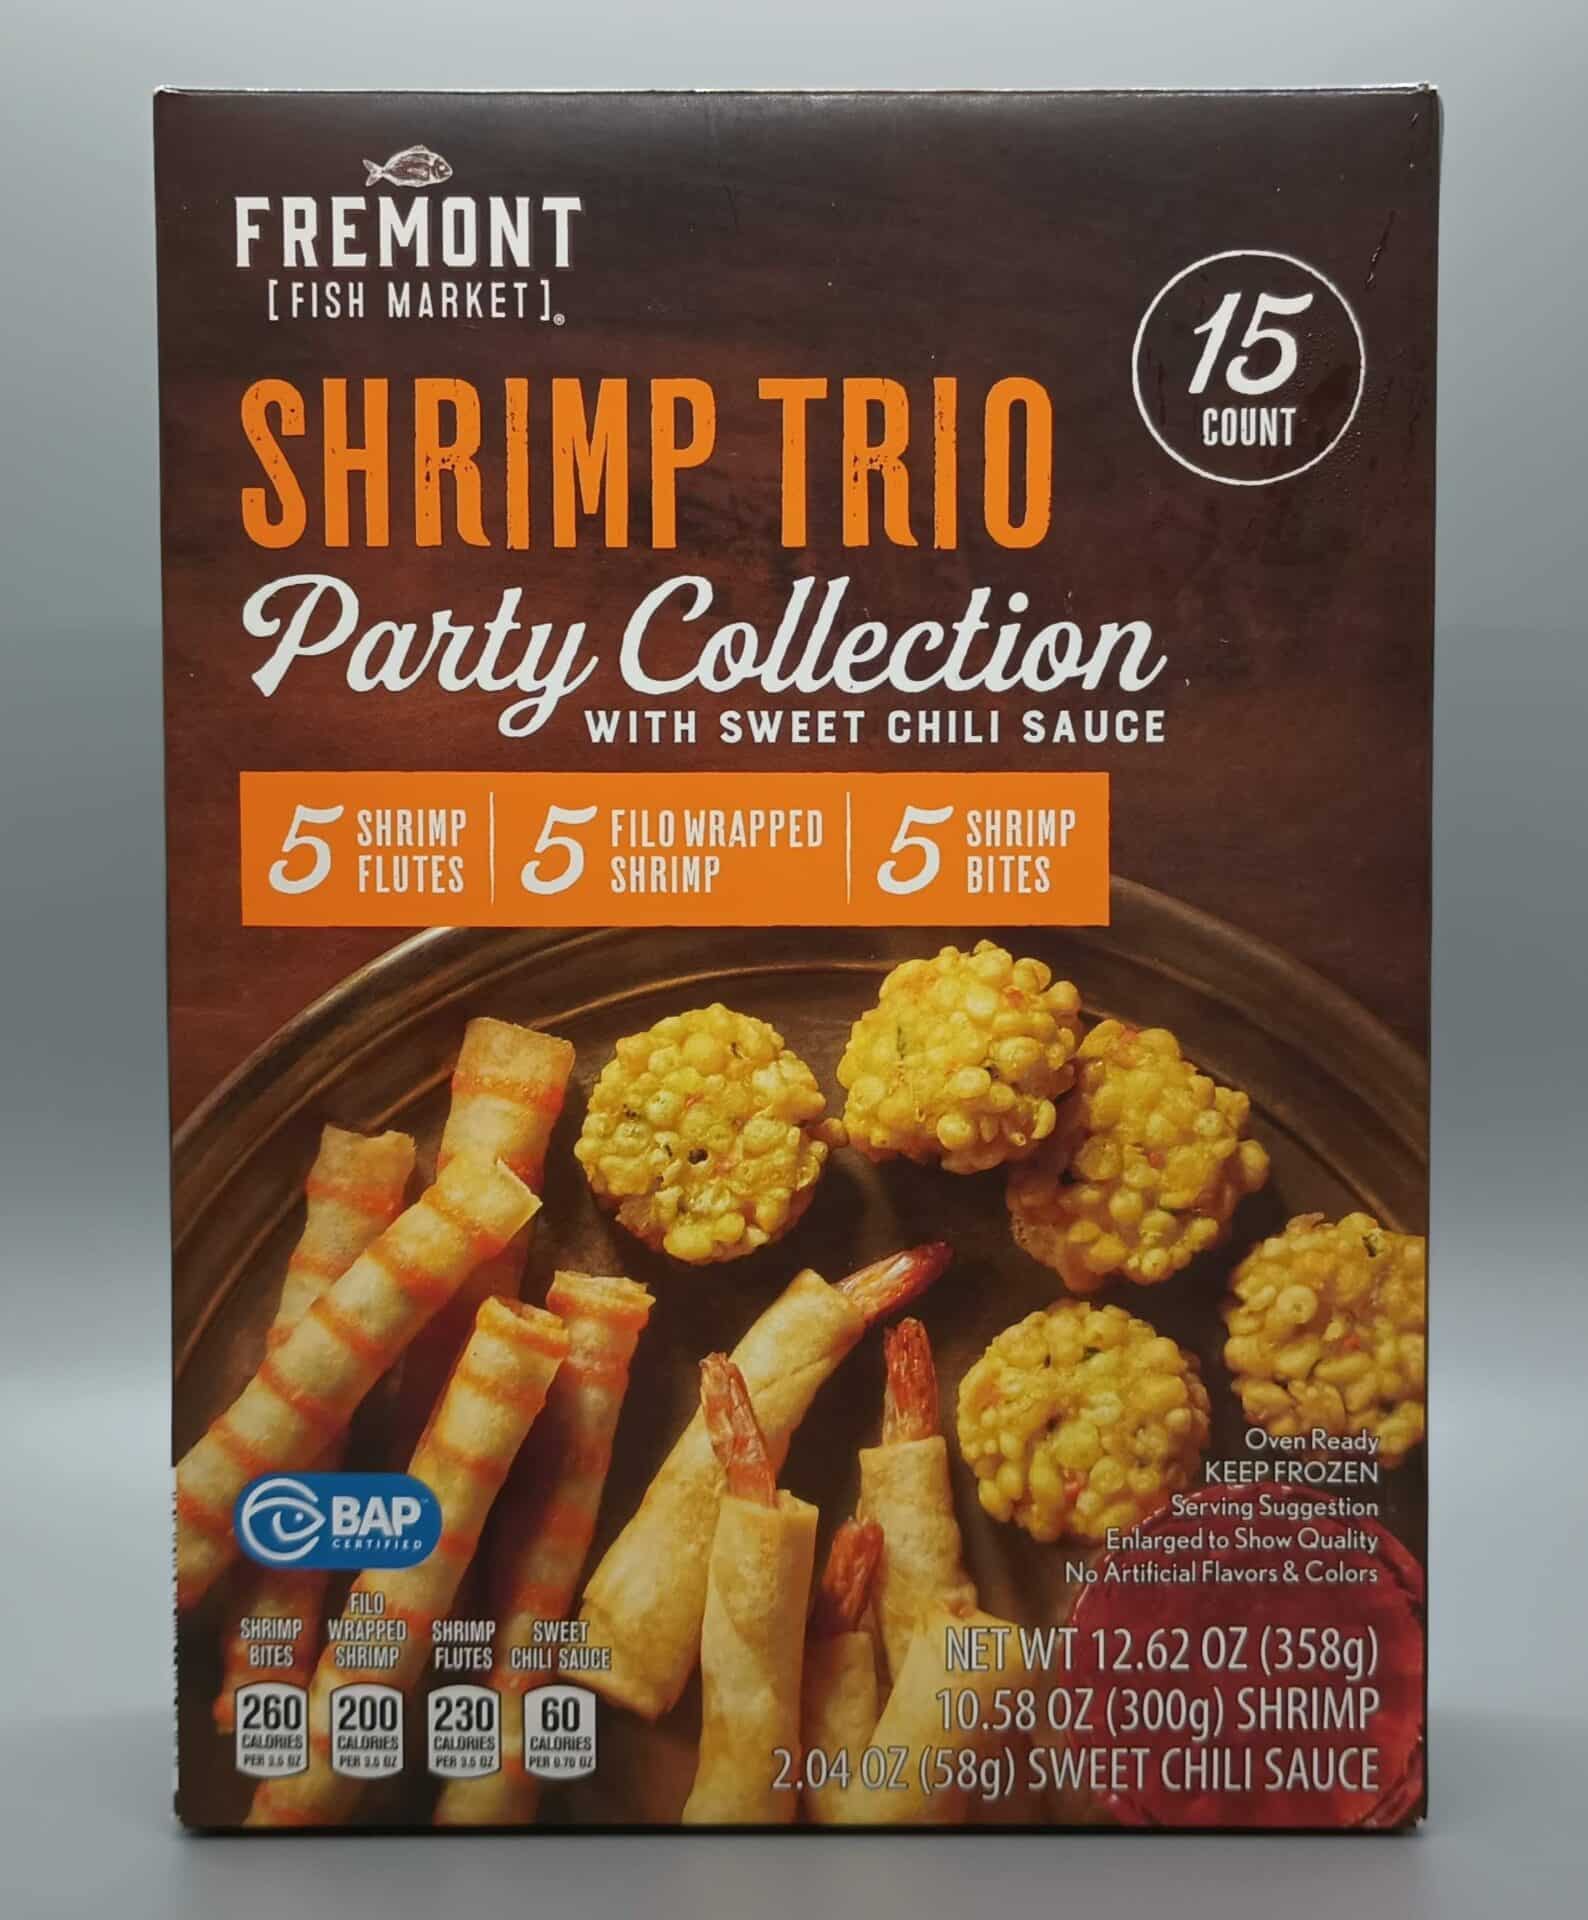 Fremont Fish Market Shrimp Trio Party Collection with Sweet Chili Sauce